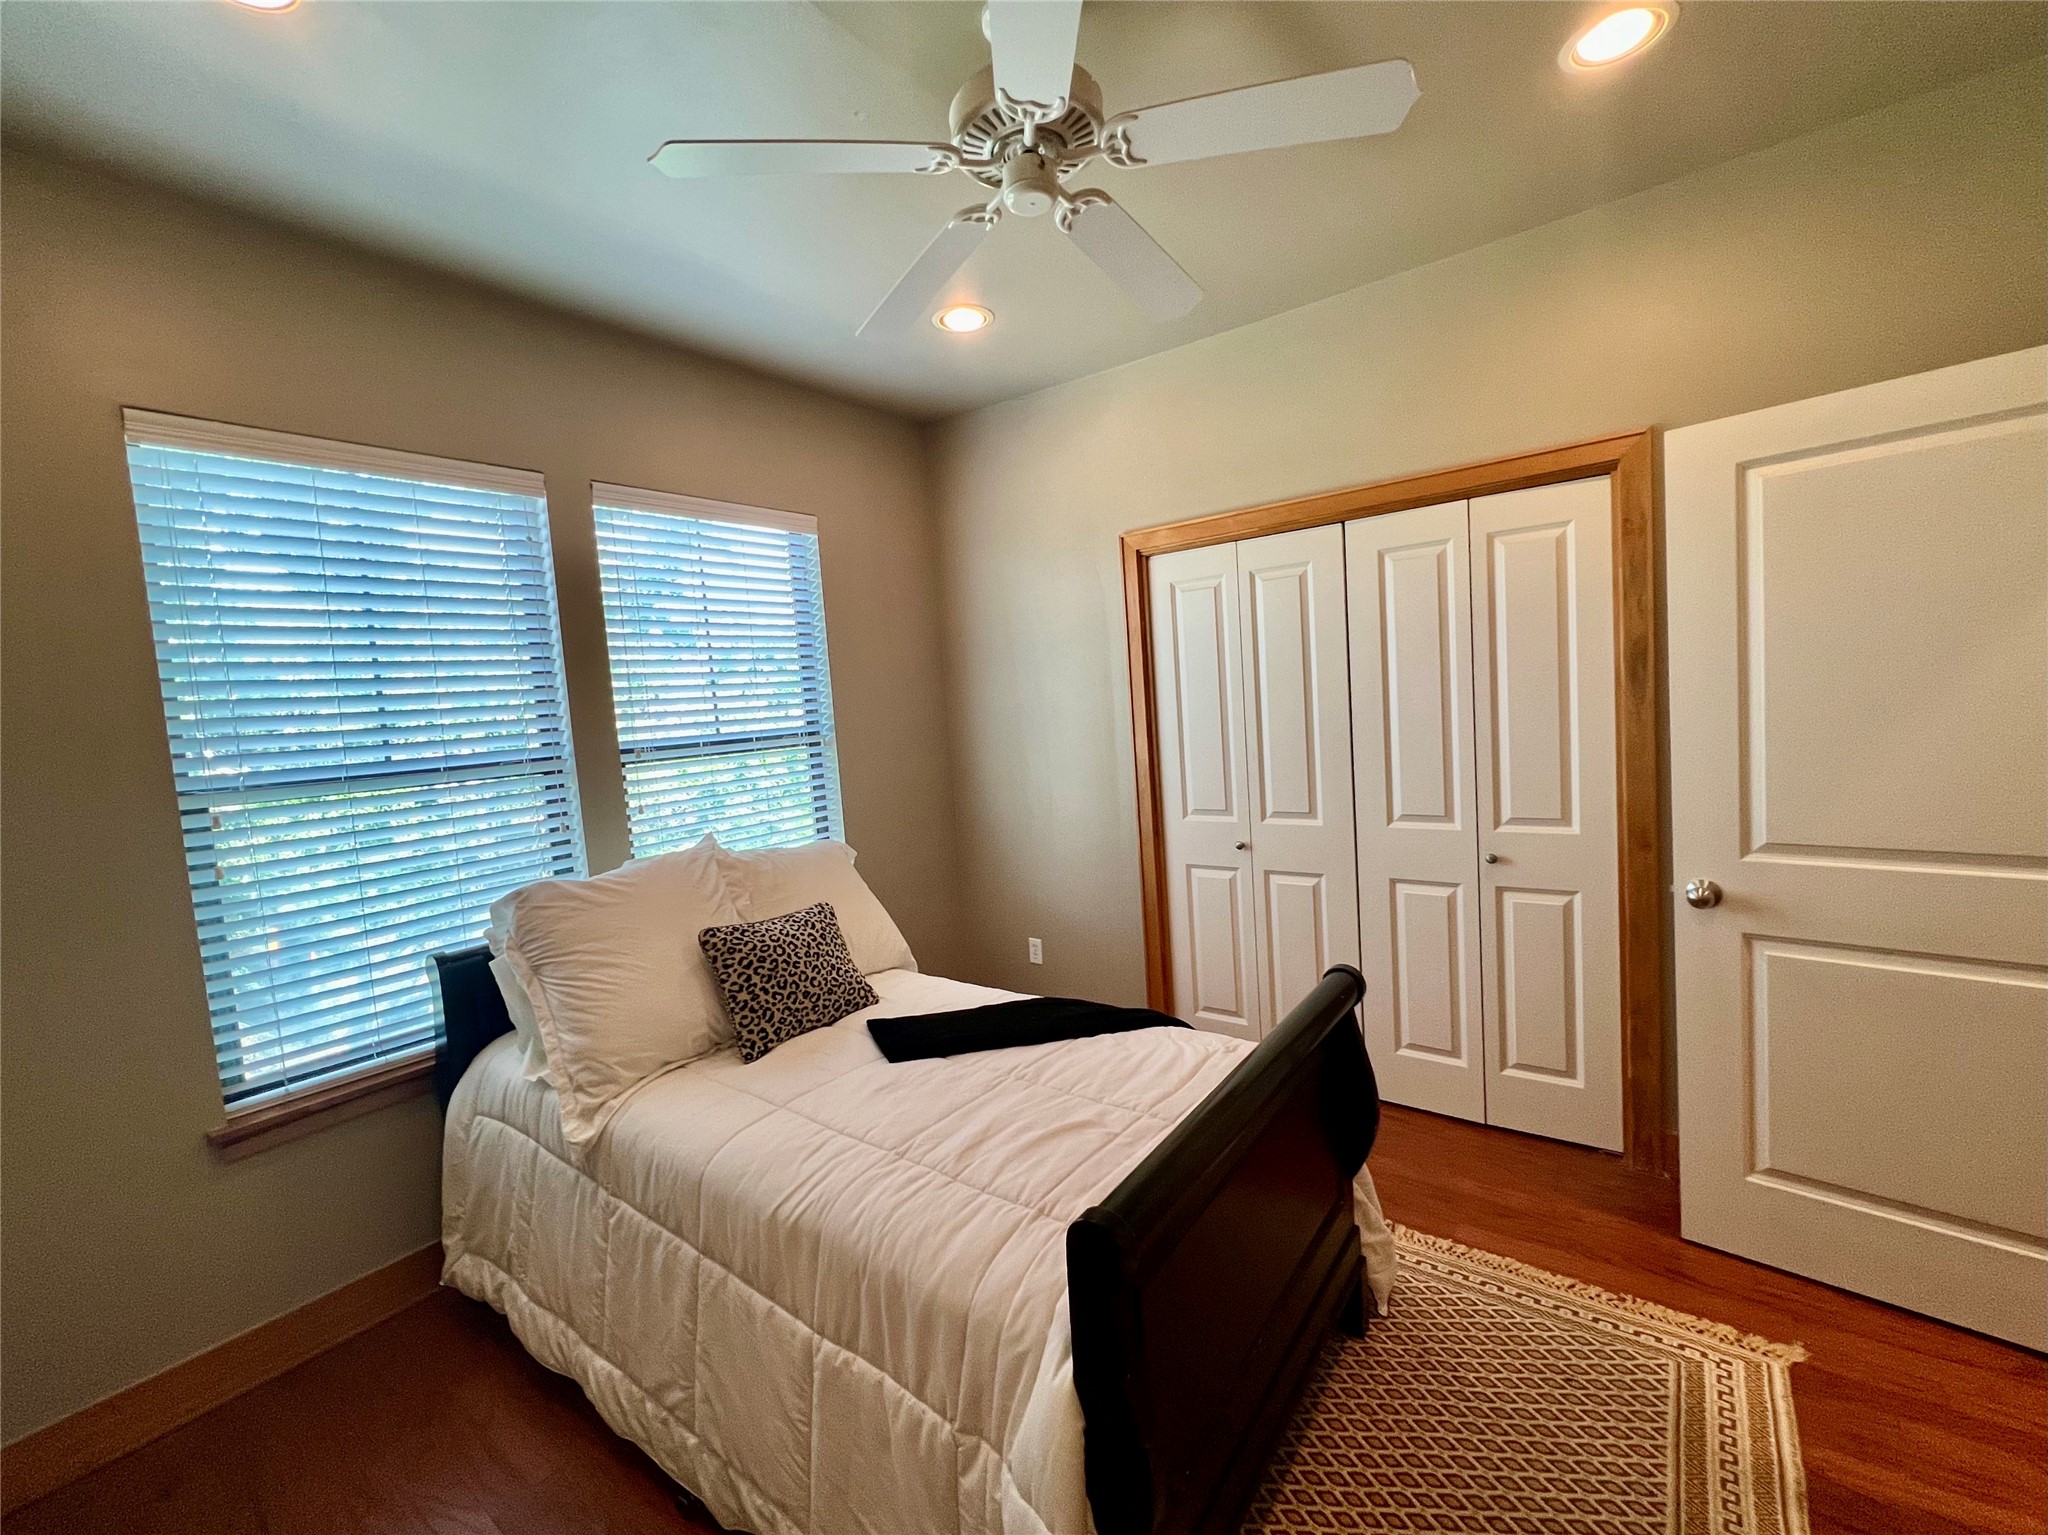 Second bedroom on the third floor with hardwood floors, large closet, private bathroom and recessed lighting.